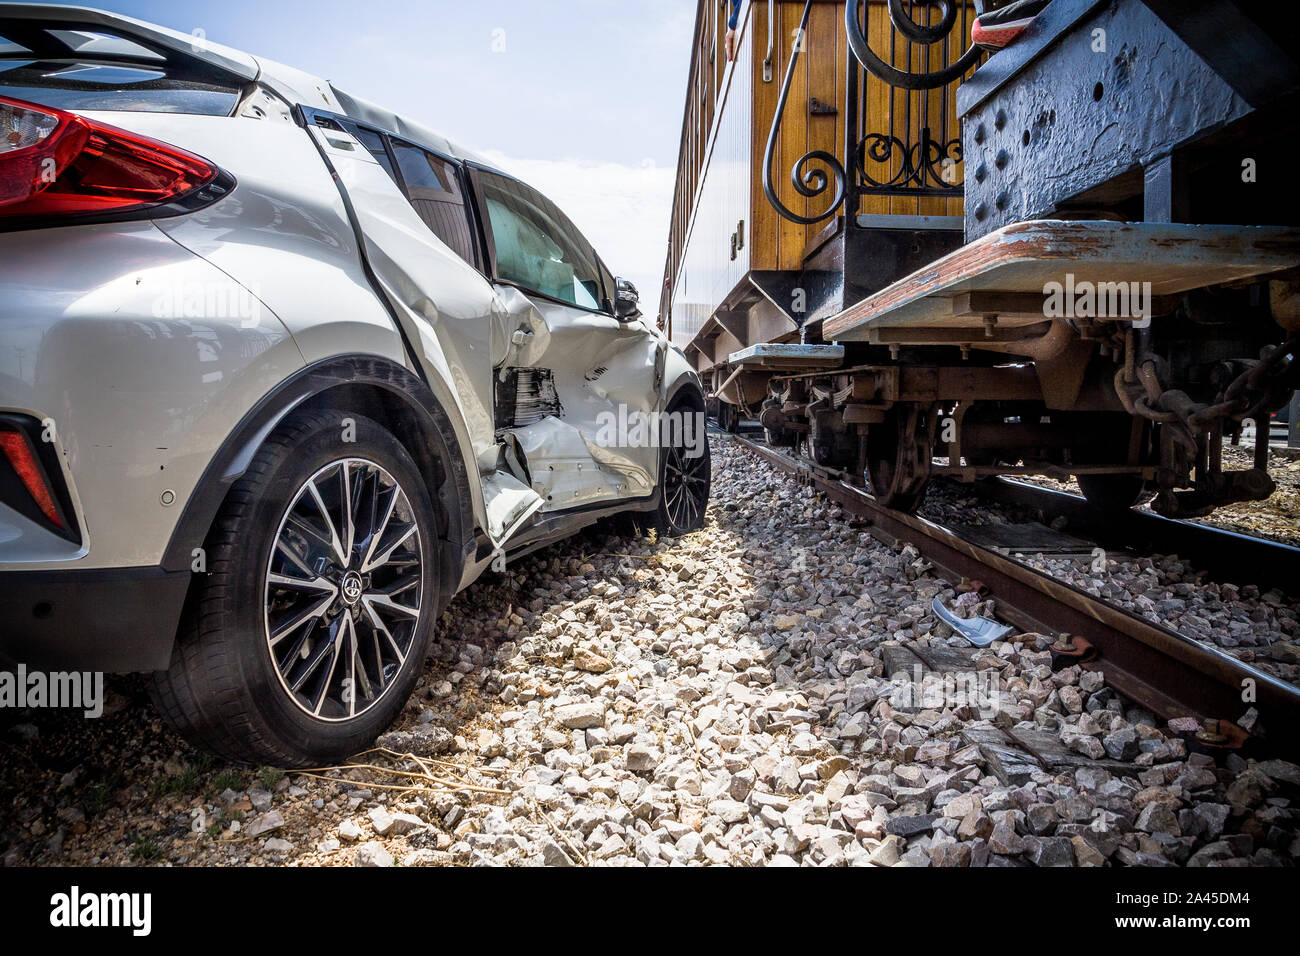 Damaged car after car accident with a train Stock Photo